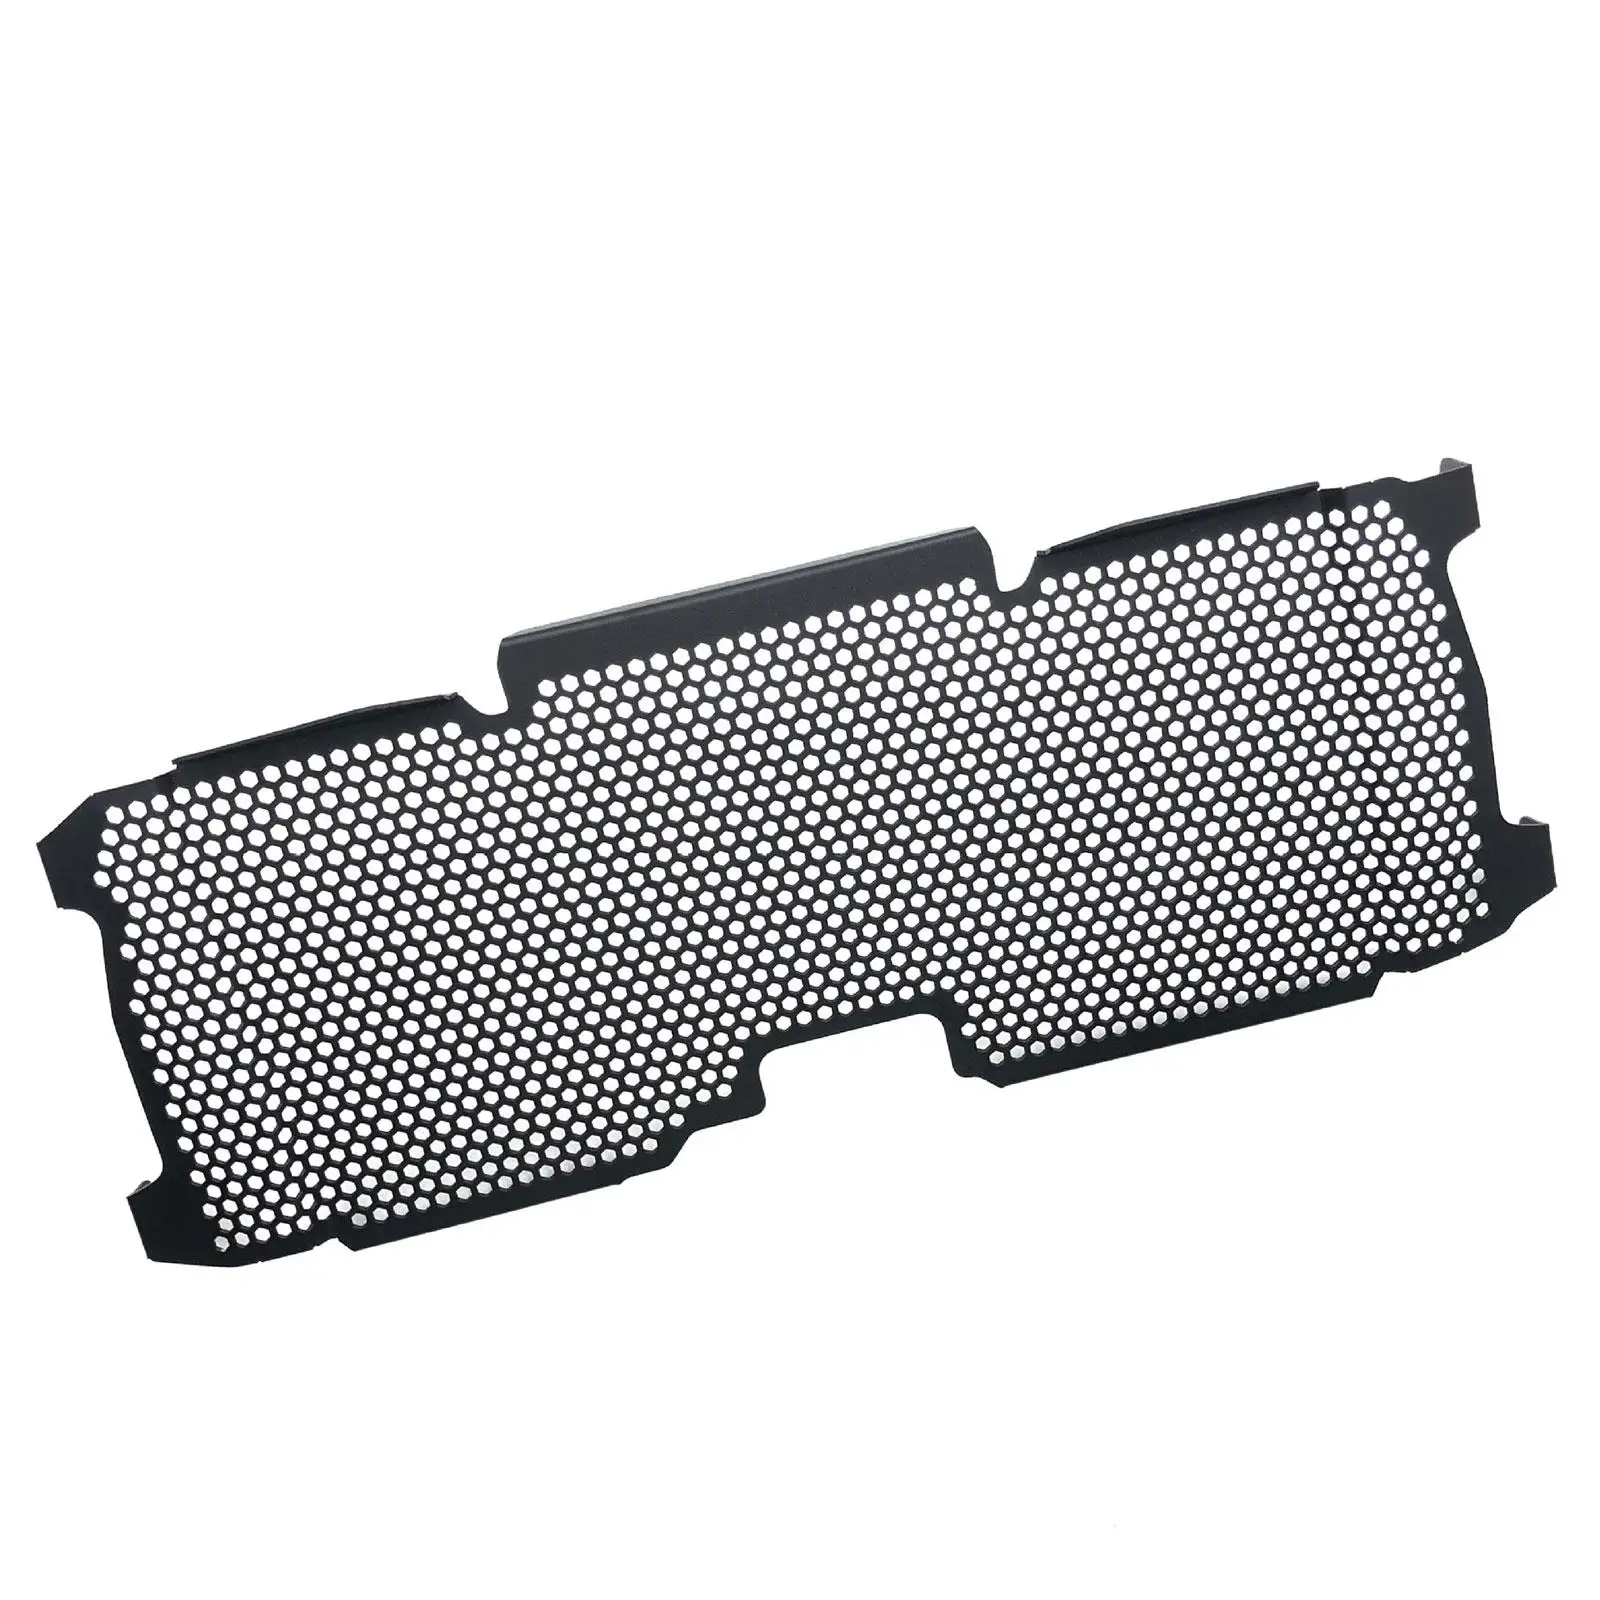 Radiator Guard Grille Protector Accessories for BMW R1200RS R1250R/RS